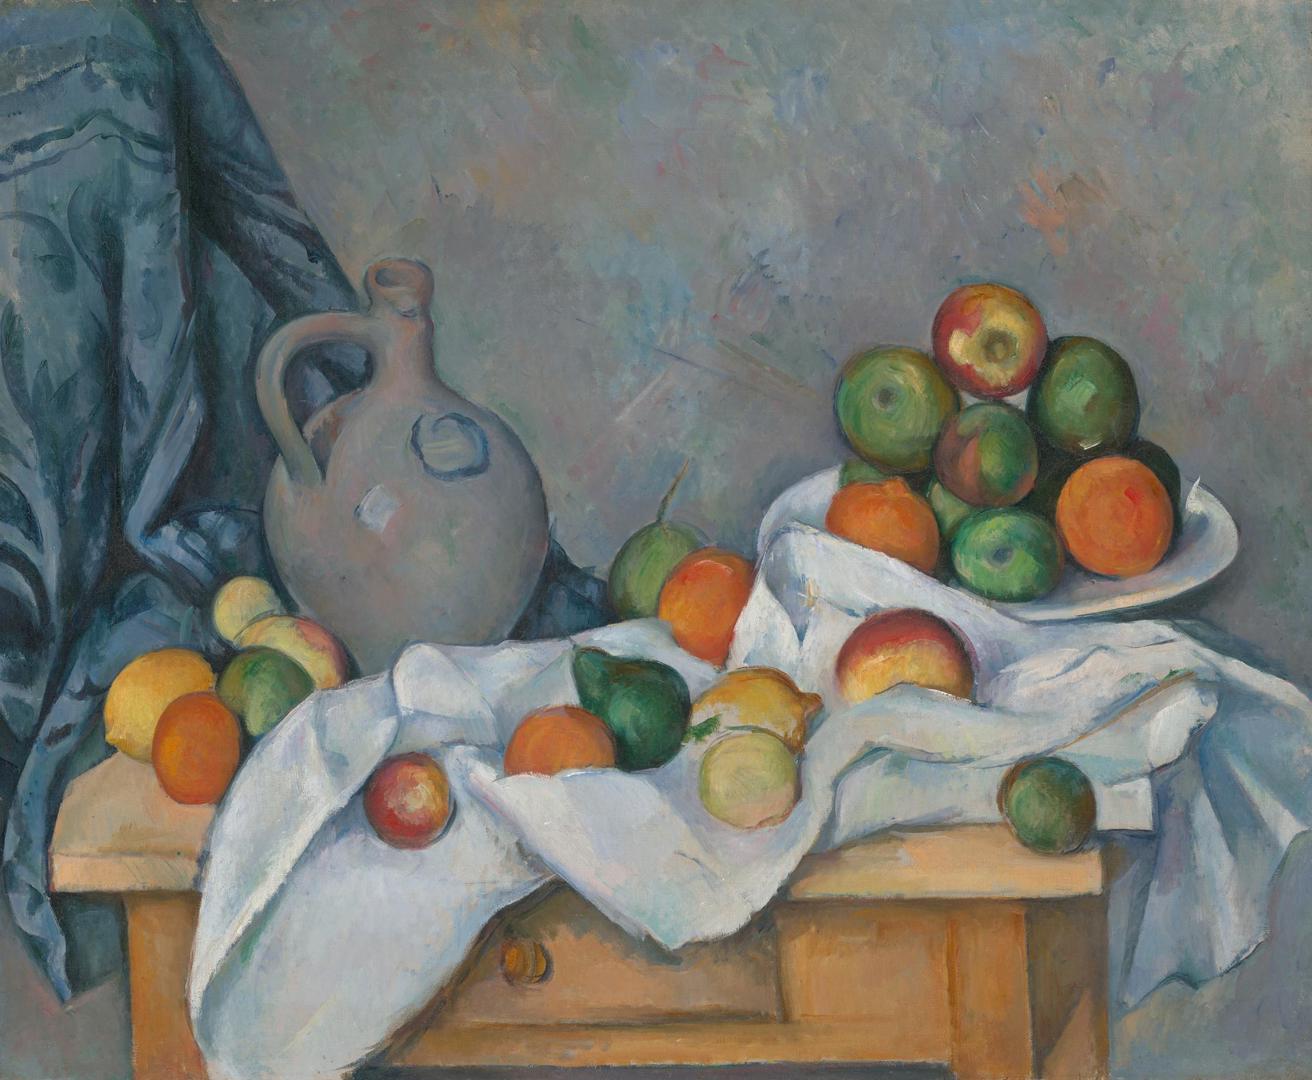 Curtain, jug and dish of fruit by Paul Cezanne